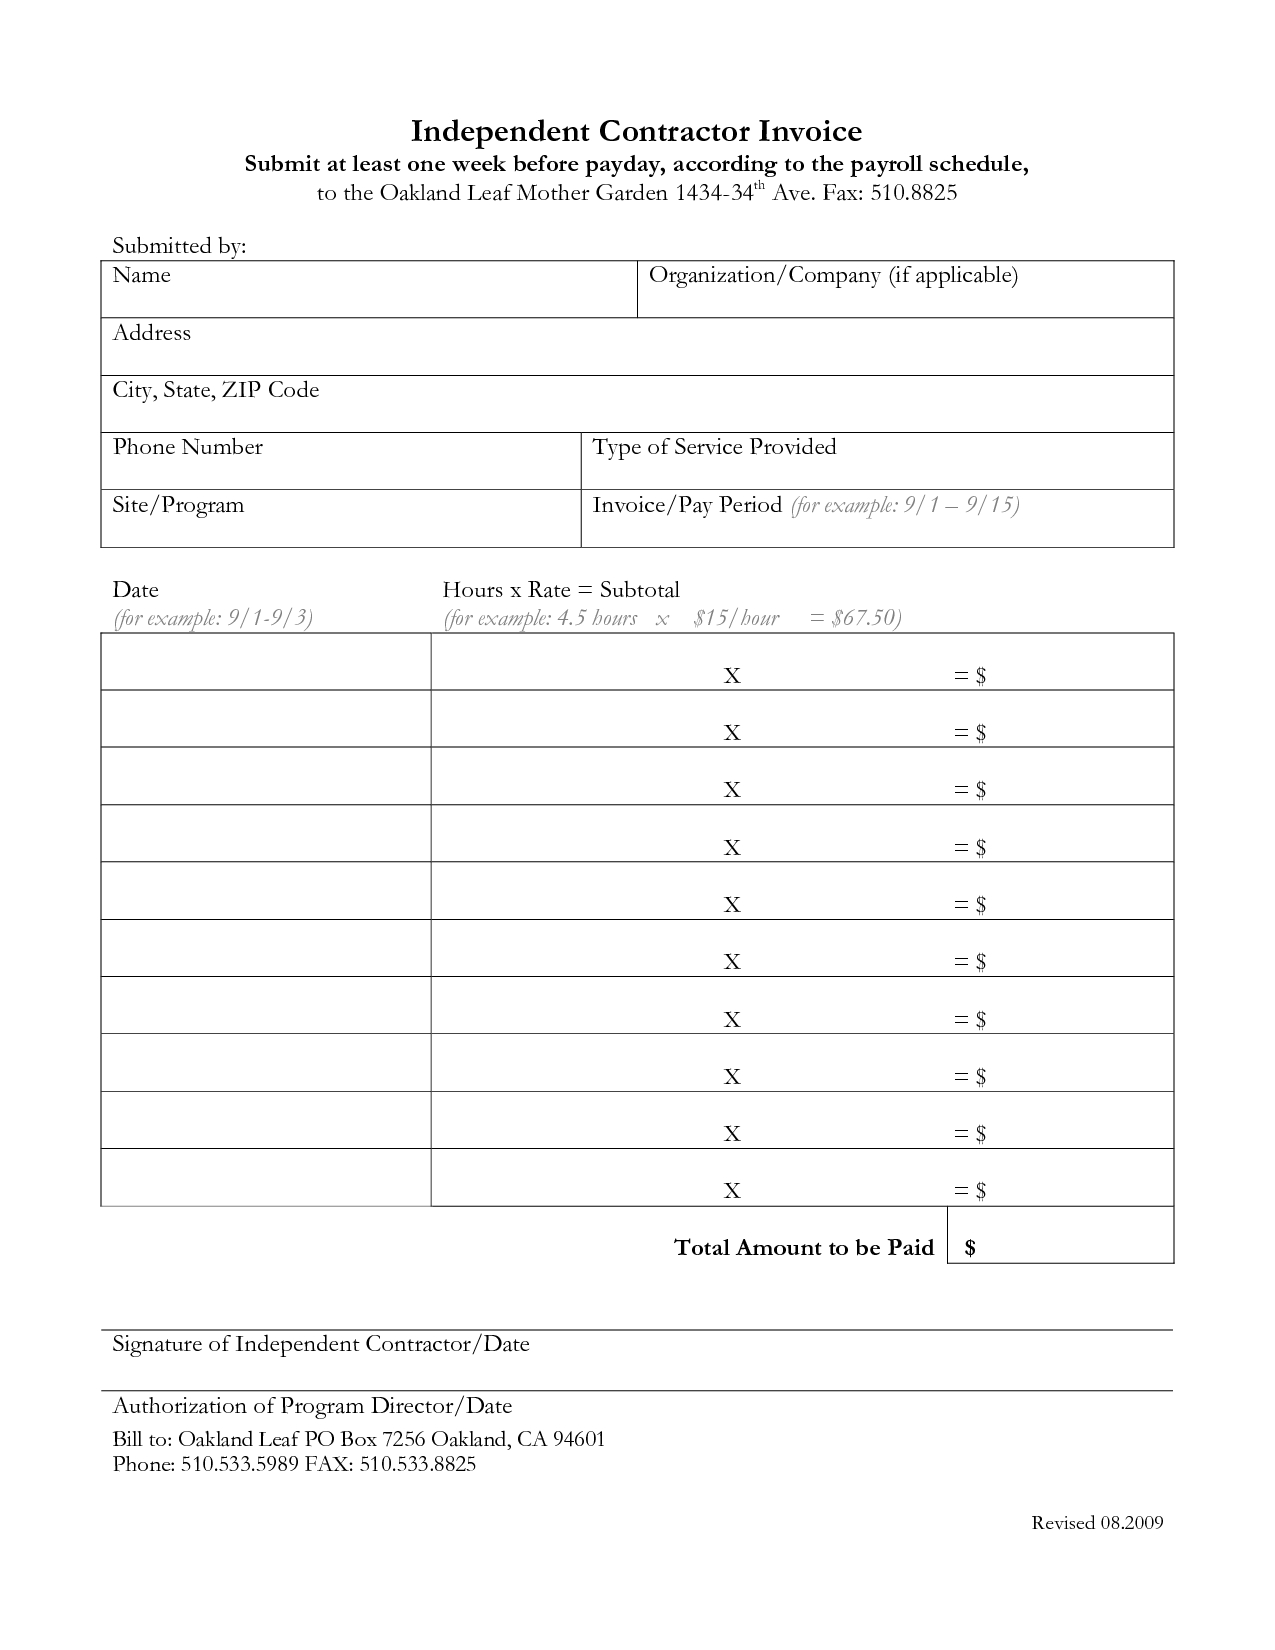 Independent Contractor Invoice Invoice Template Ideas